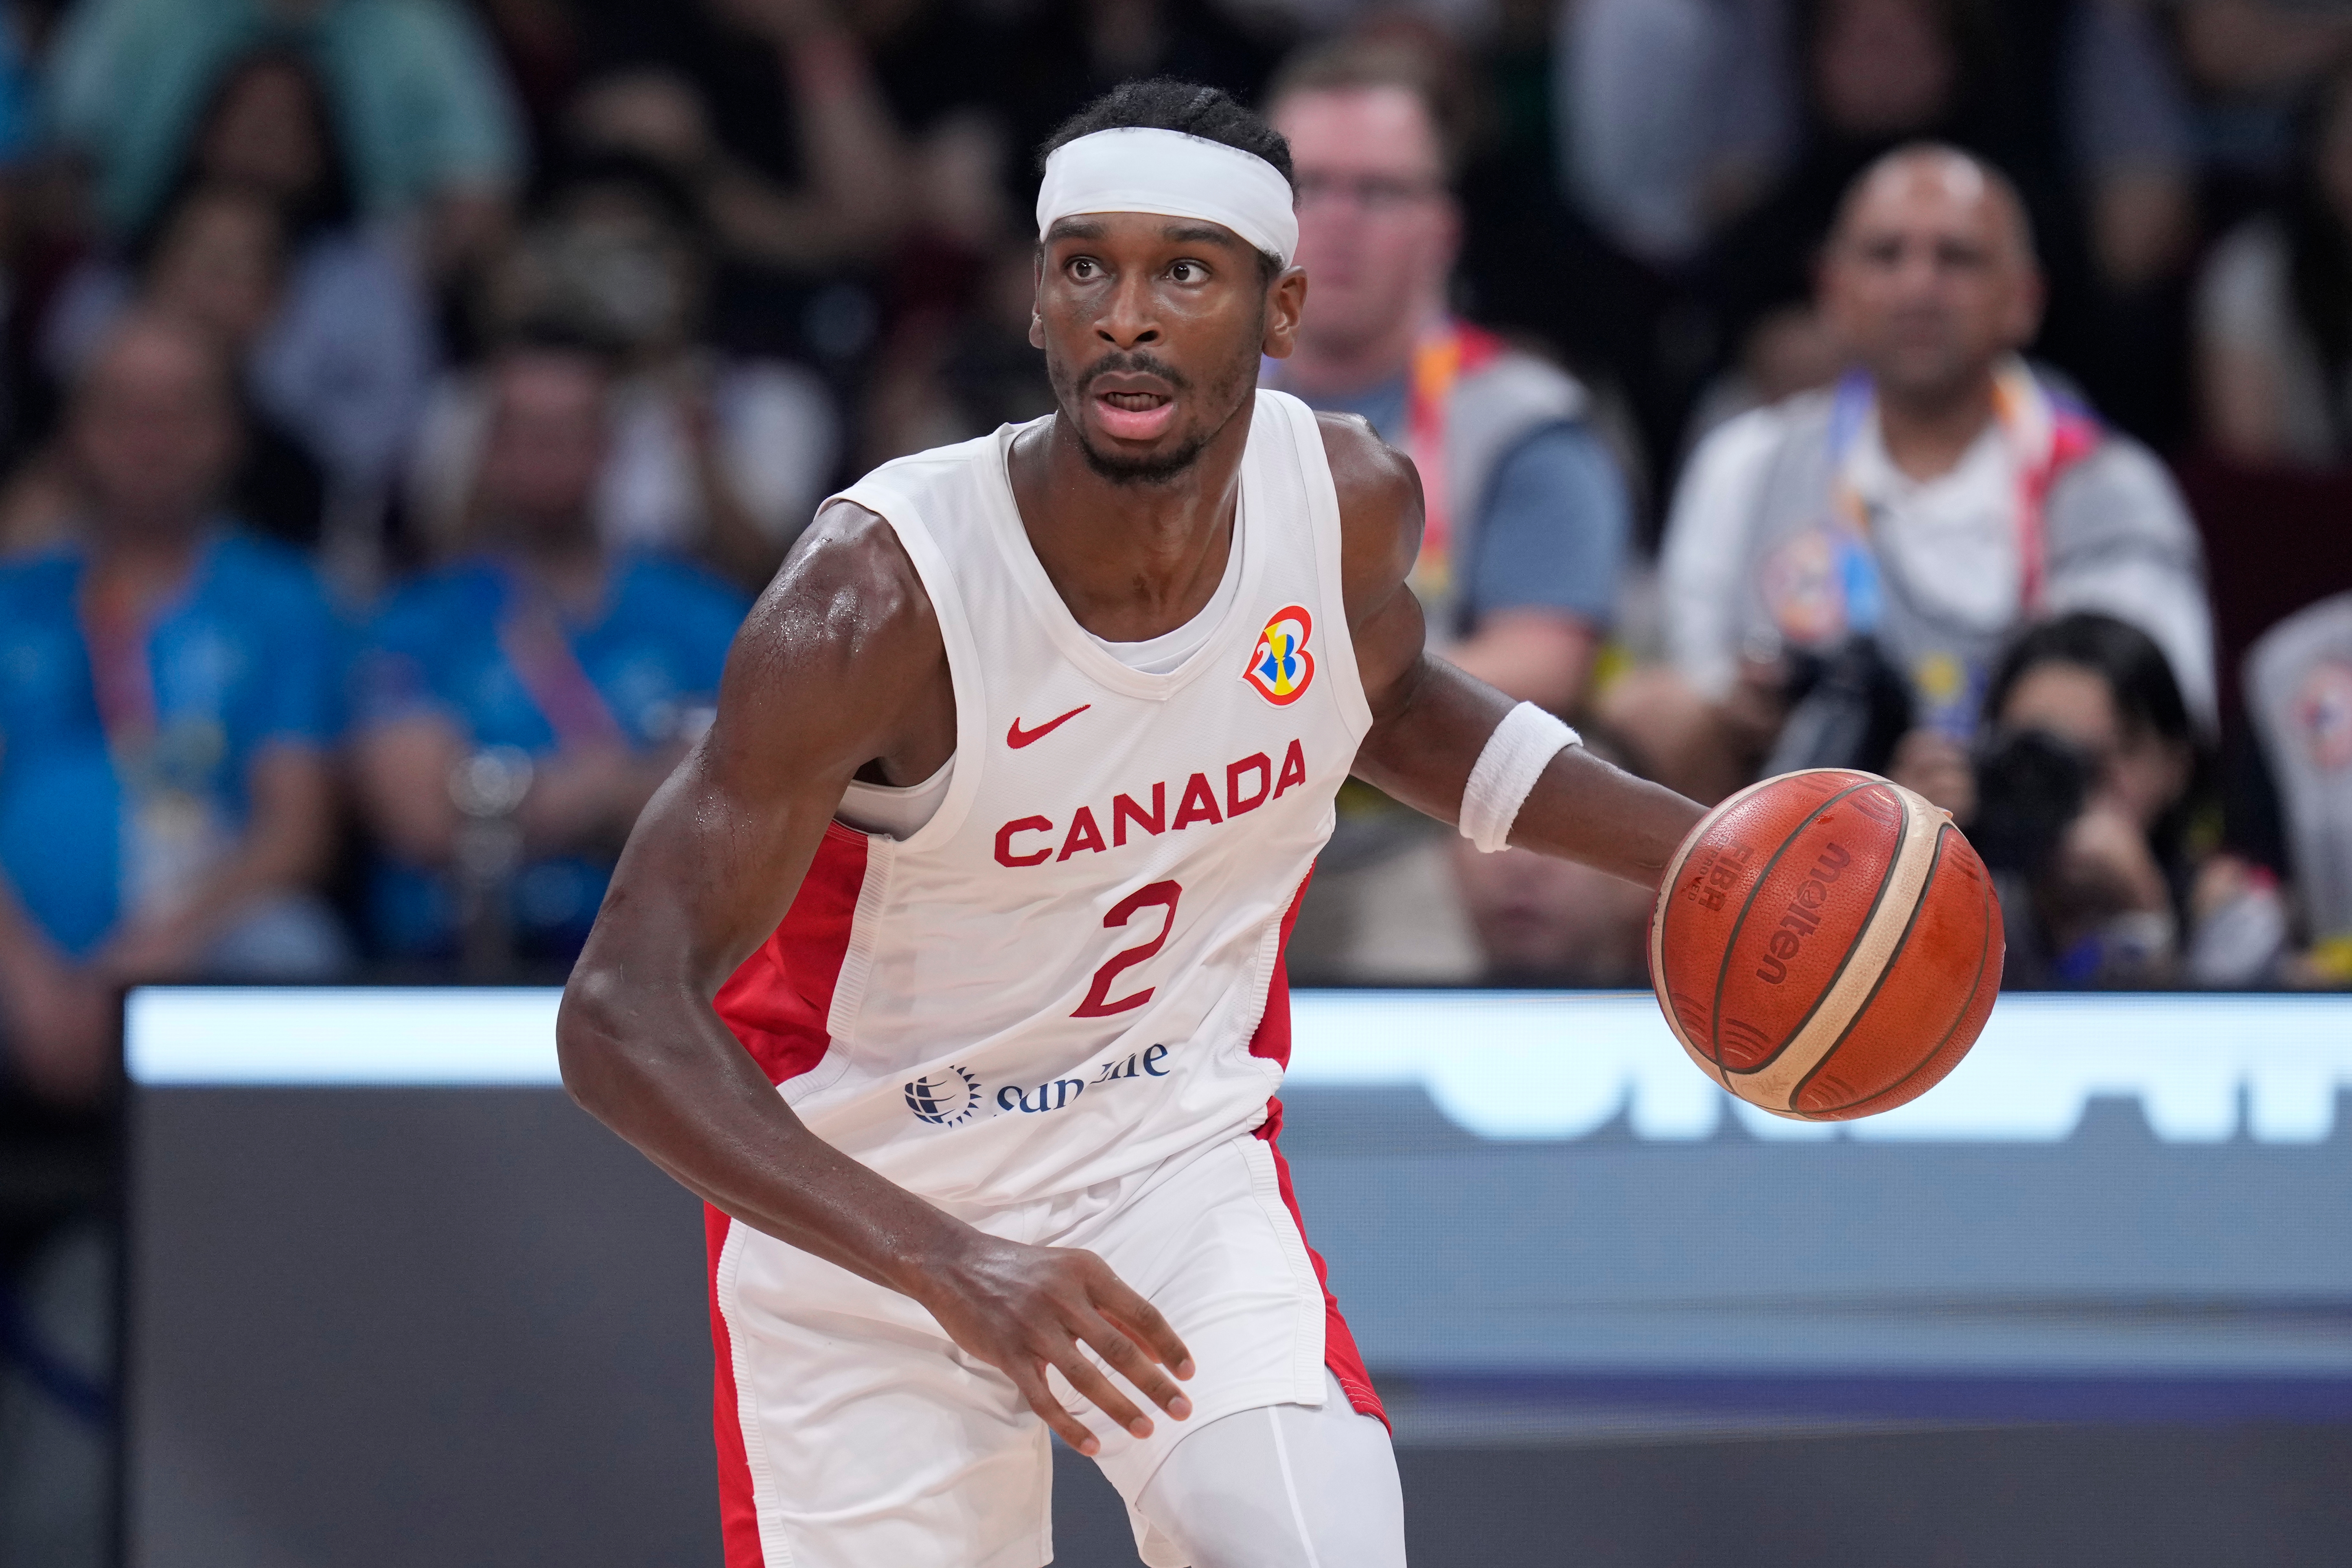 Stationed in Siberia, Canadian basketball players bring resilience to  national team